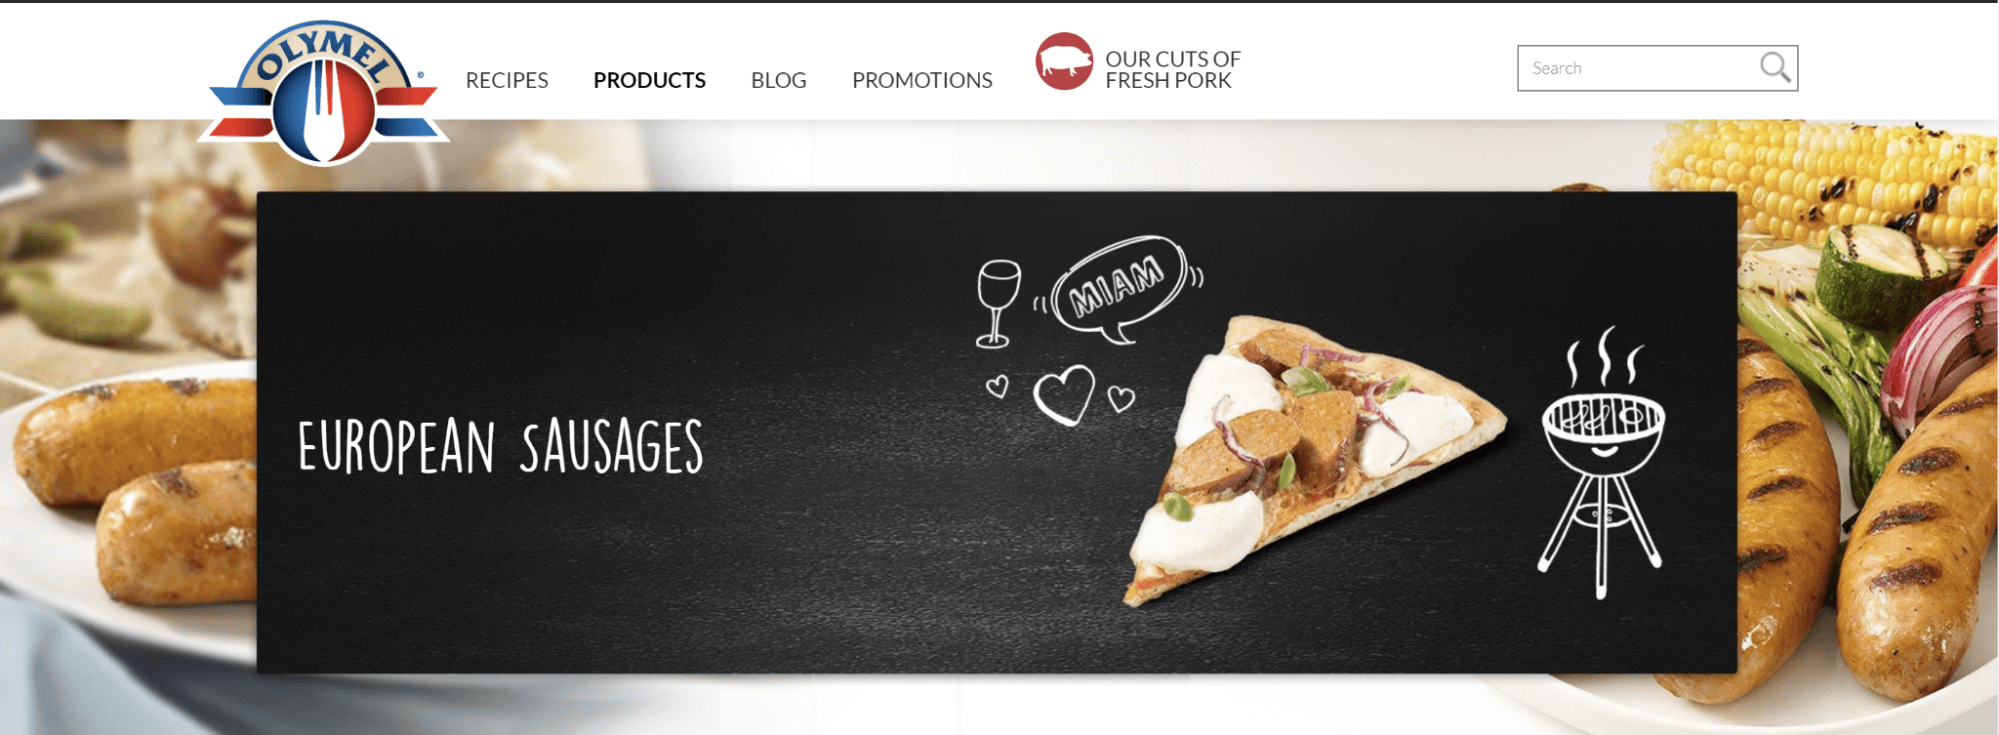 Olymel website banner announcing “European sausages” with a visual that has “miam” which is a French onomatopoeia that no English speaker would understand.